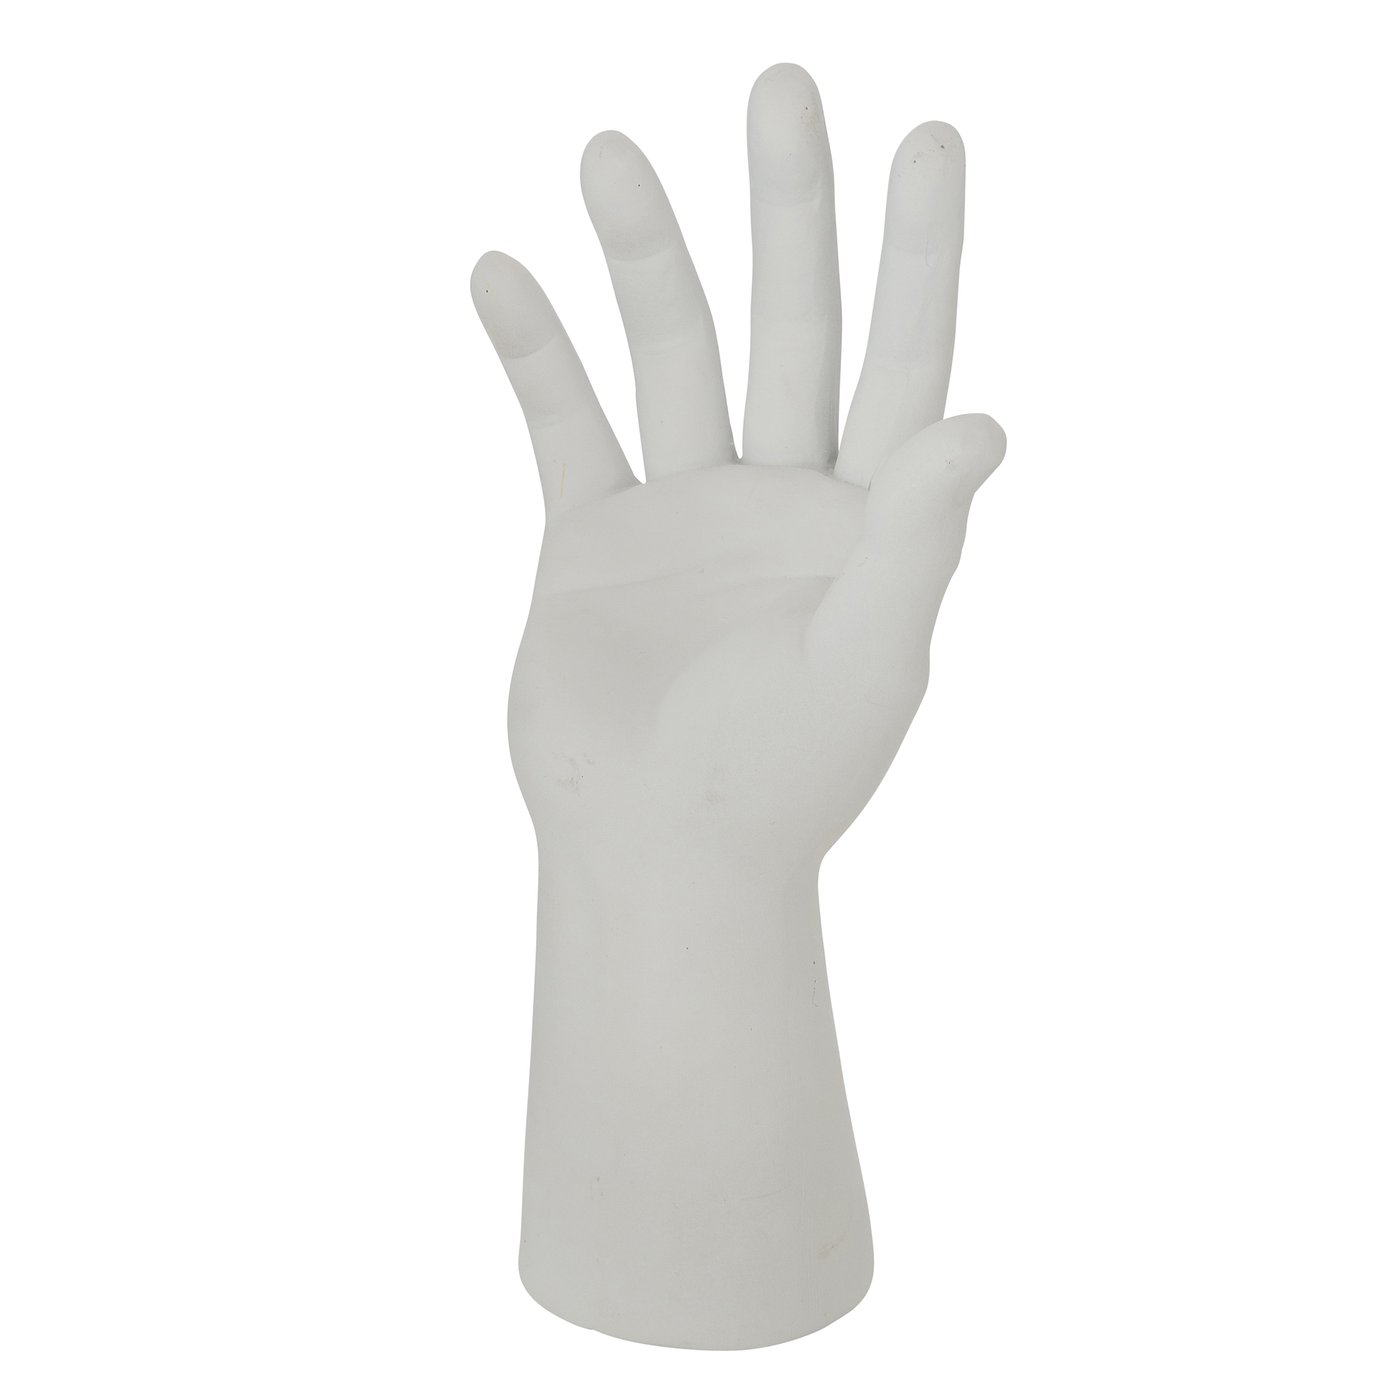 &Quirky White Hand Figure